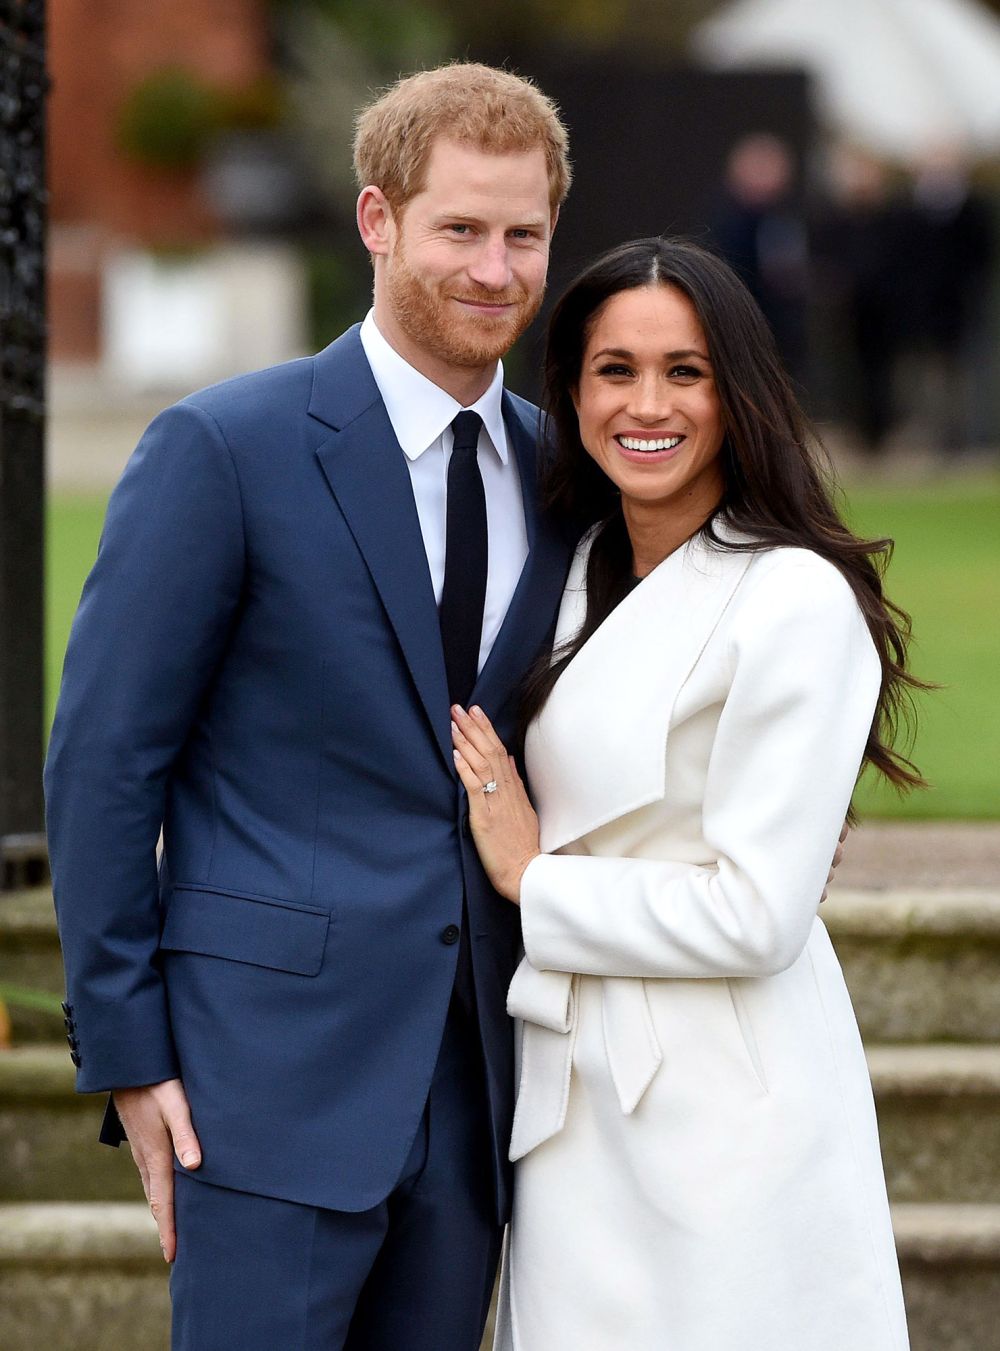 Prince Harry and Meghan Markle Were Secretly Engaged Three Months Before Announcement